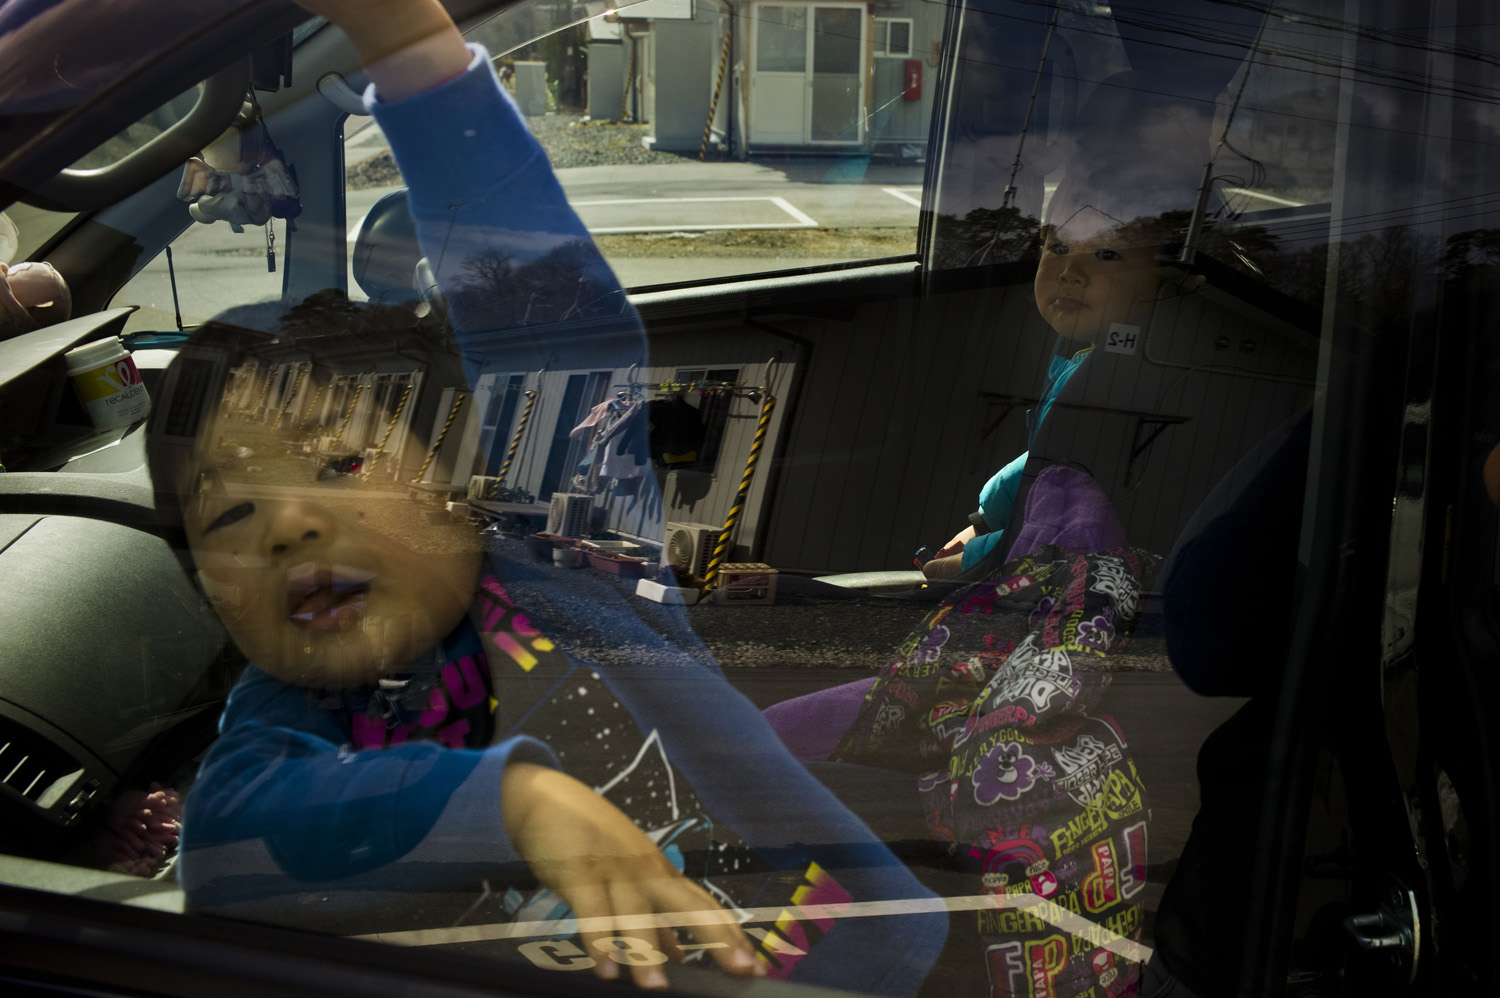 Japan, Iwaki, 2014. Young evacuees from Naraha in temporary housing units. Riku (3) and Sara (2) wait for their parents Takumi and Mayumi Kitazawa (not pictured) to arrive before going shopping.